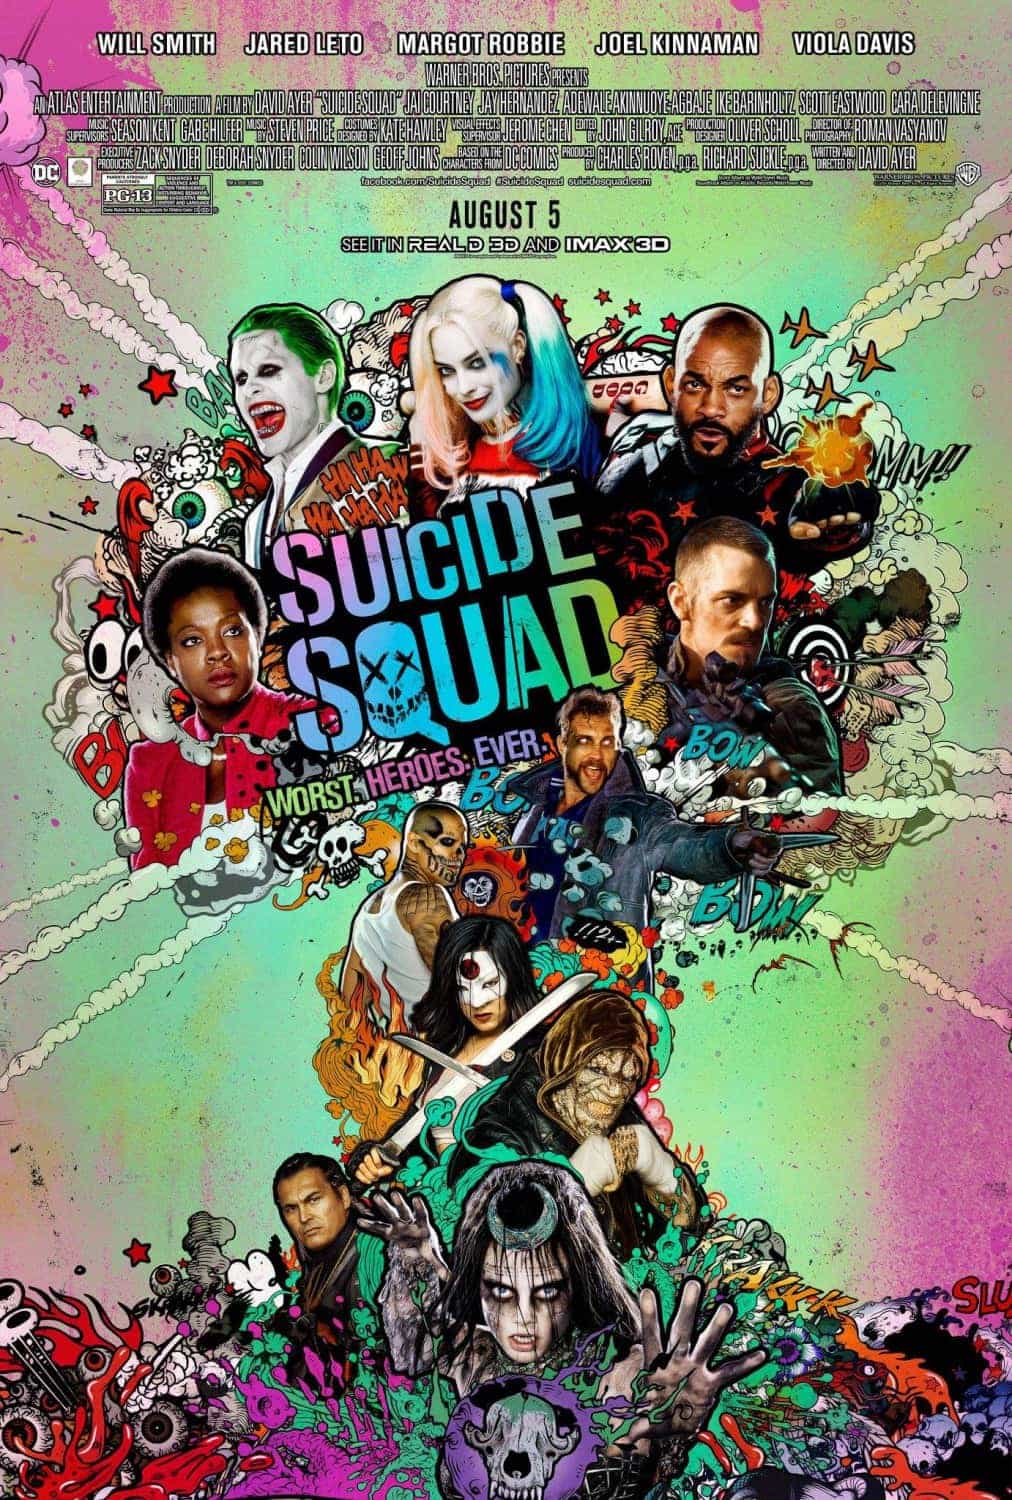 World Box Office Weekending 21 August 2016:  Suicide Squad Still tops the global chart